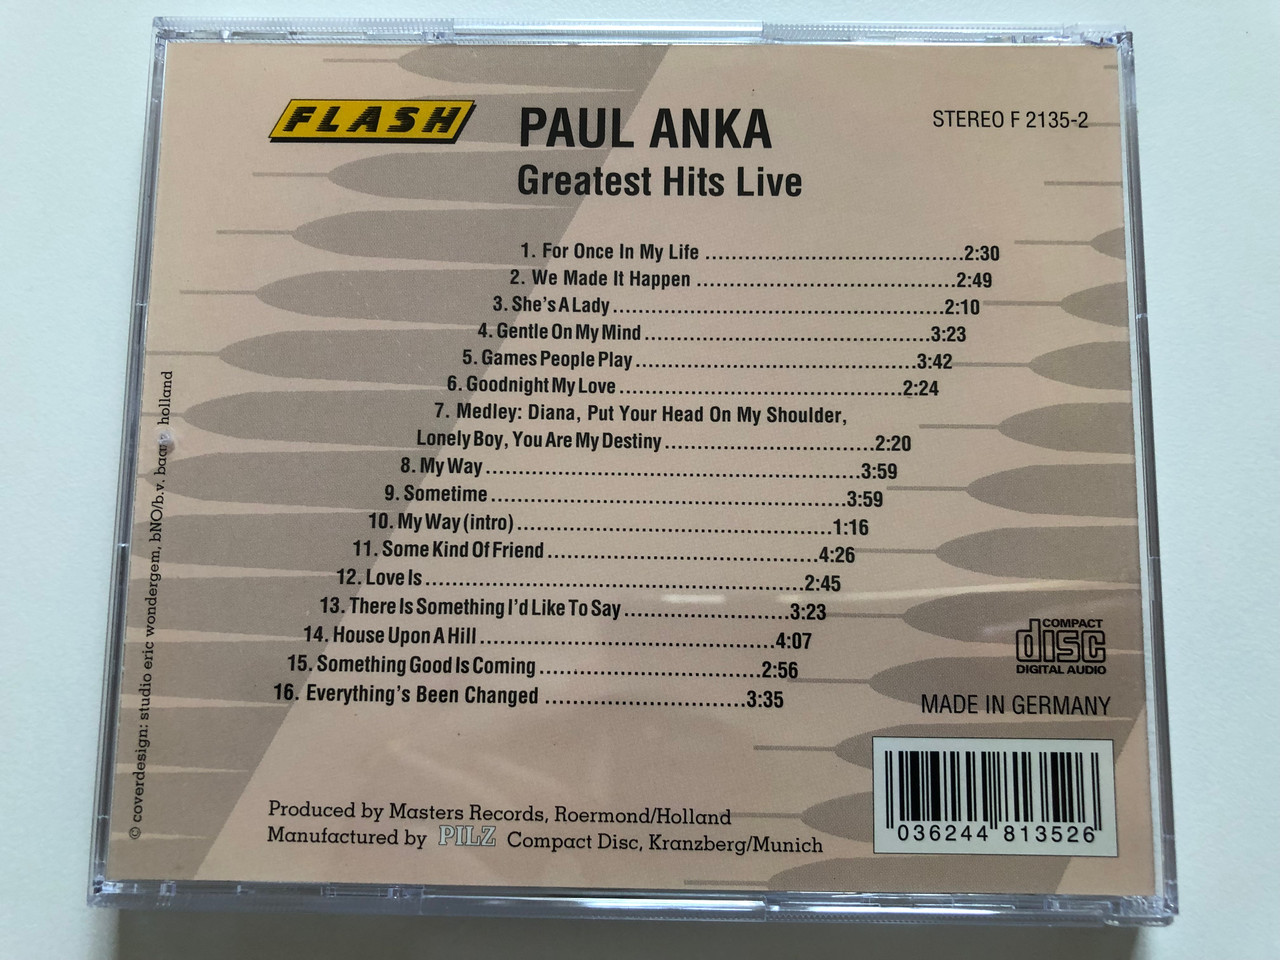 https://cdn10.bigcommerce.com/s-62bdpkt7pb/products/30710/images/181348/Paul_Anka_Greatest_Hits_Live_Shes_A_Lady_For_Once_In_My_Life_House_Upon_A_Hill_My_Way_And_Many_Others_Flash_Audio_CD_Stereo_F_2135-2_4__64190.1623742759.1280.1280.JPG?c=2&_ga=2.171687462.787544708.1623769862-1646000393.1623769862